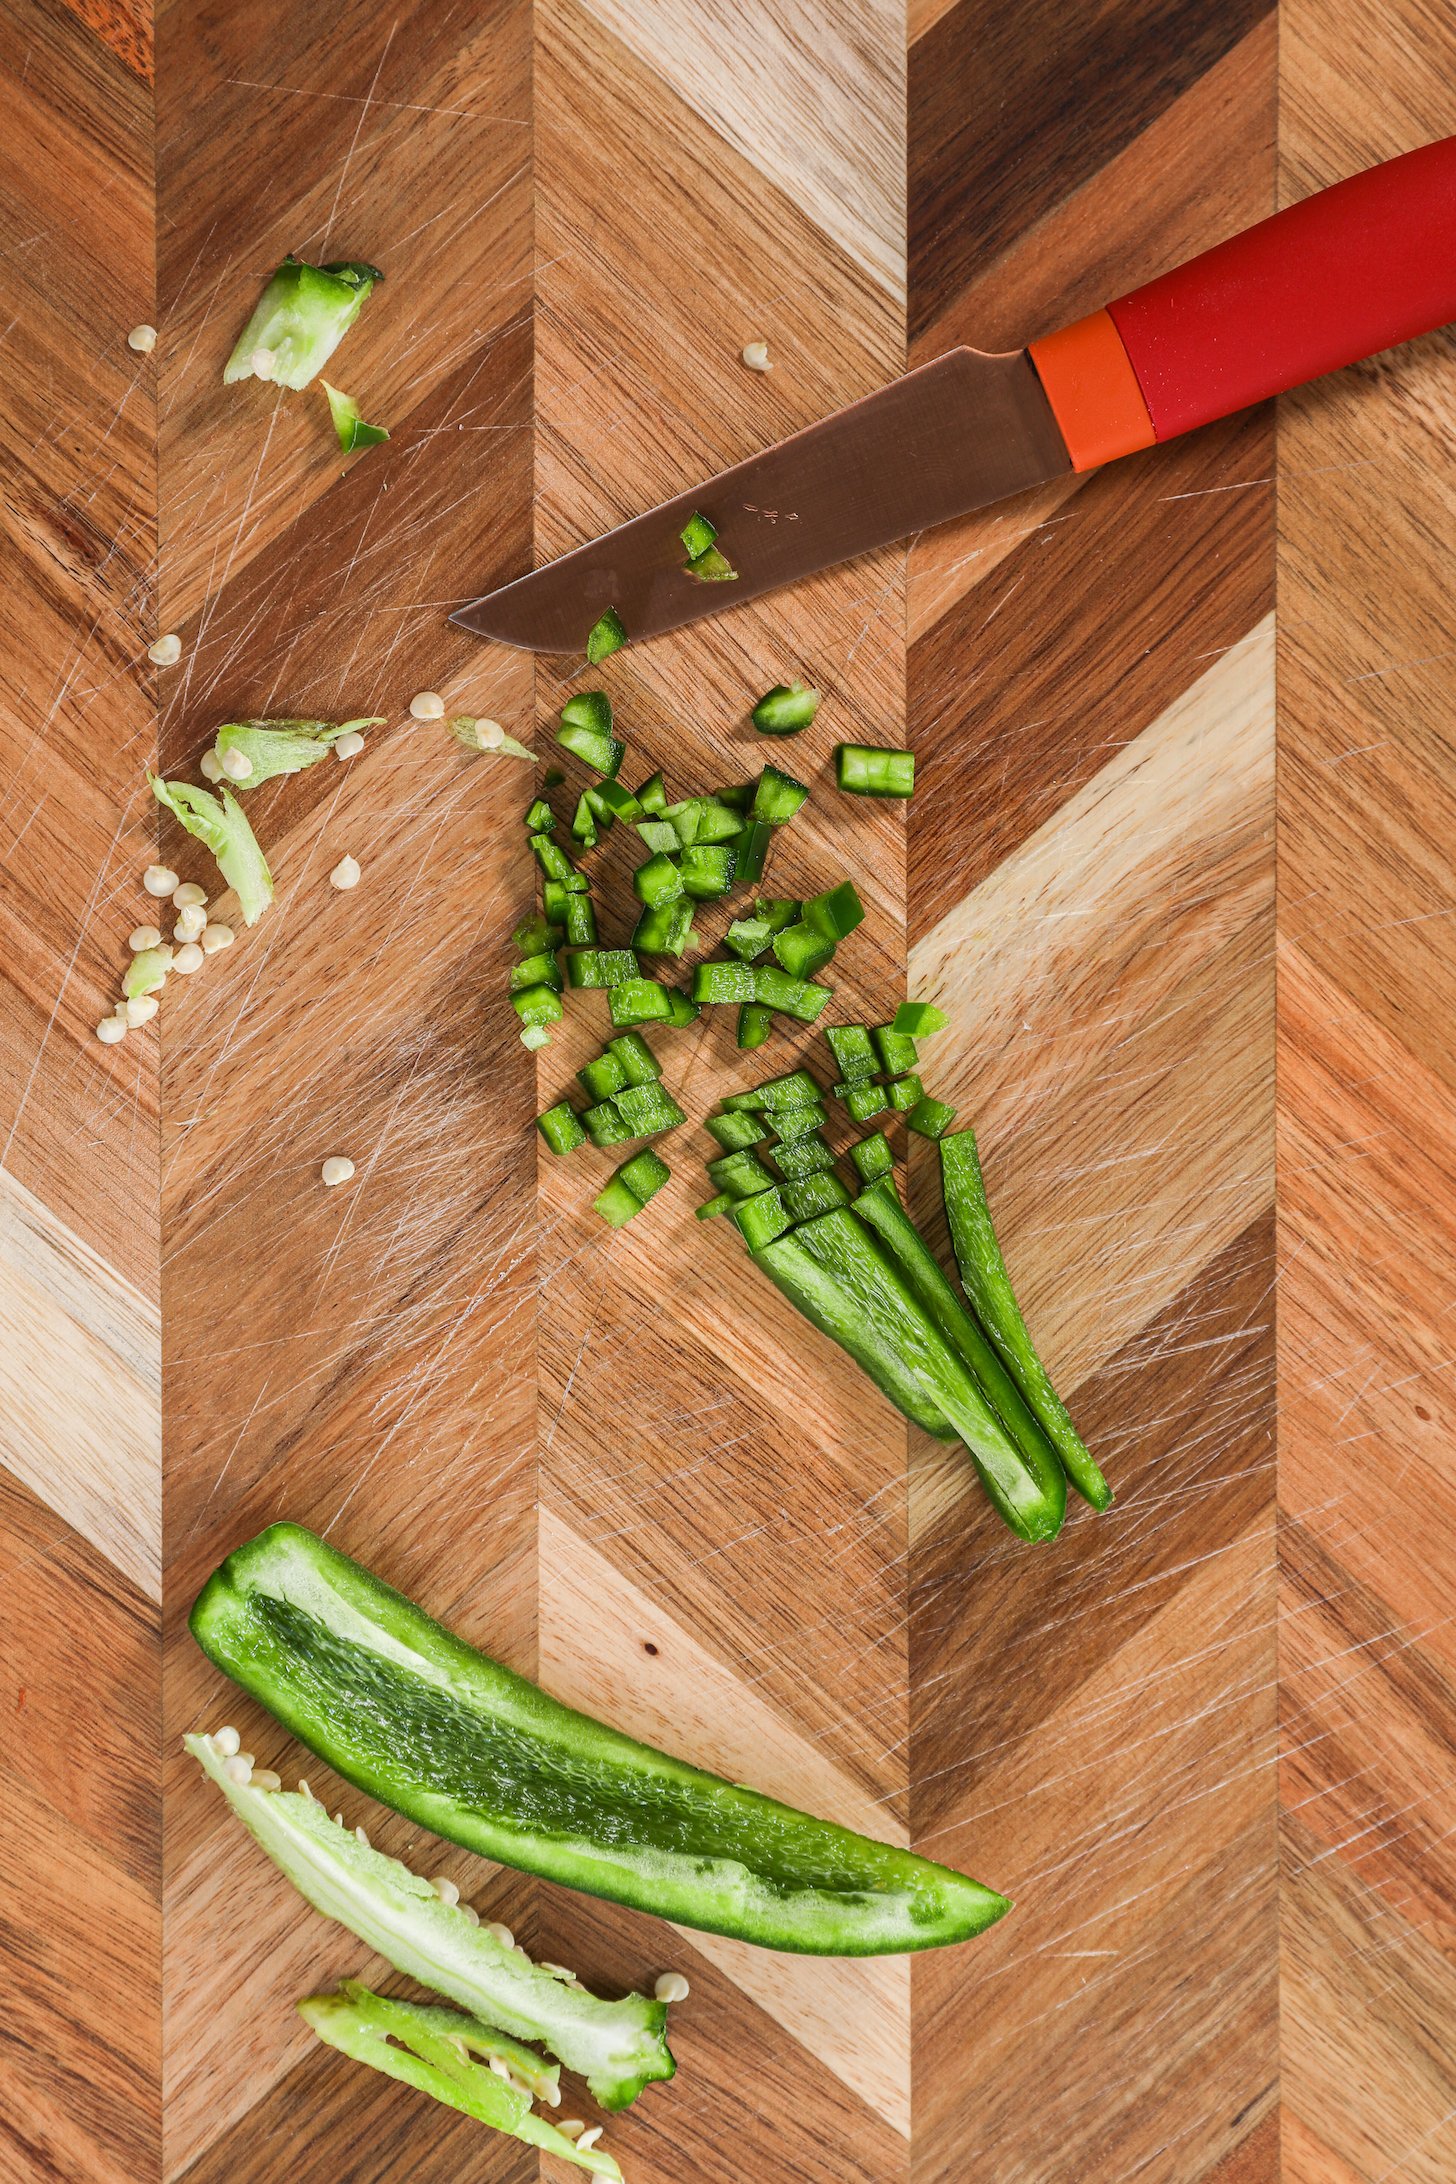 Finely chopped and strips of green chilli pepper on a checkered wooden board with a red knife.